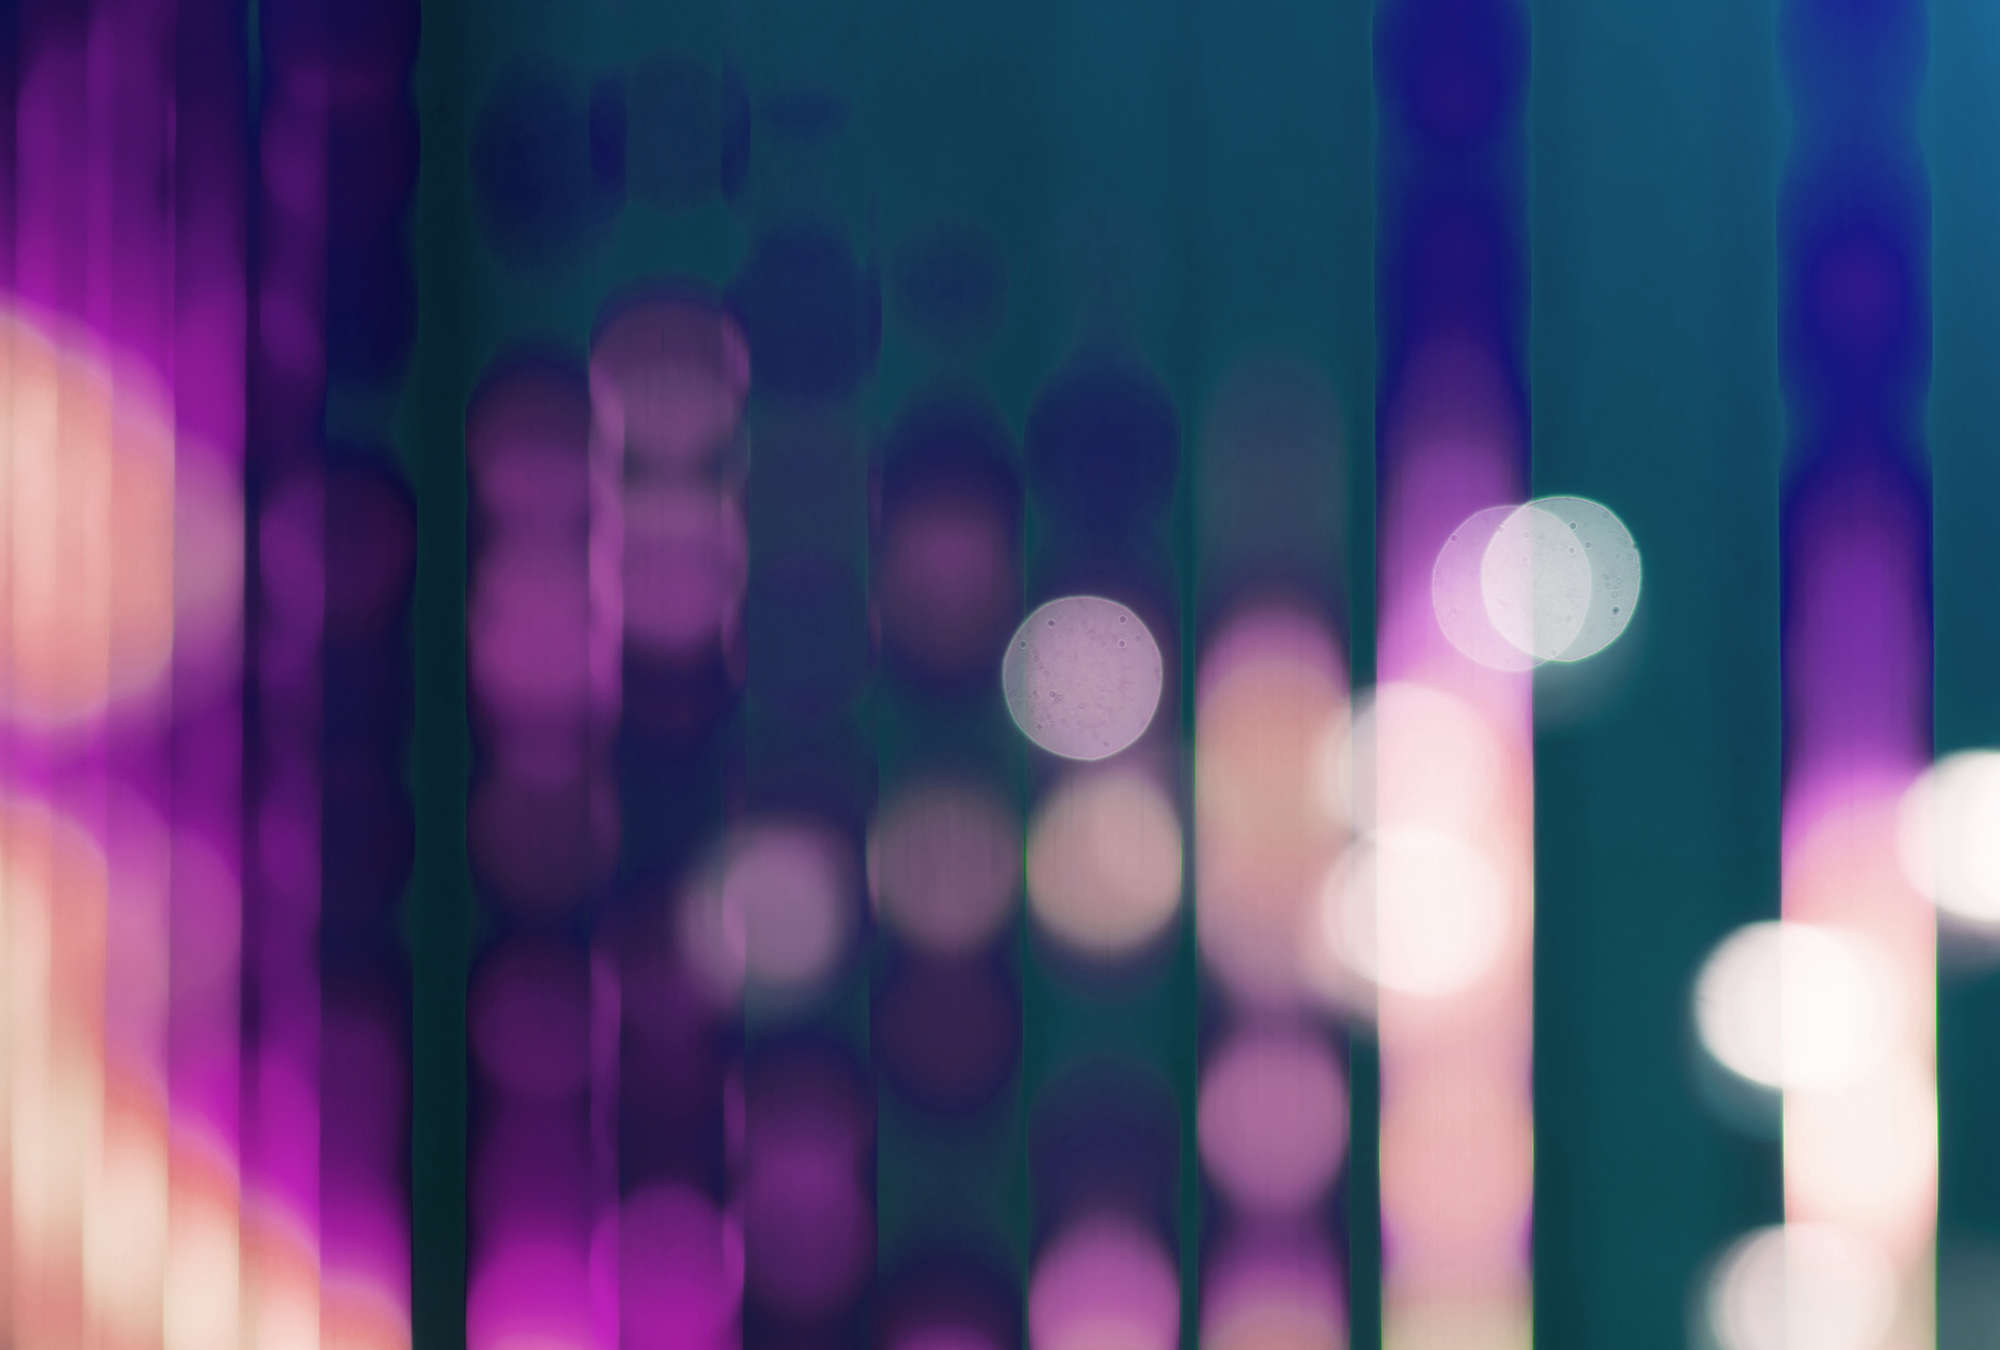             Big City Lights 3 - Photo wallpaper with light reflections in violet - Blue, Violet | Matt smooth non-woven
        